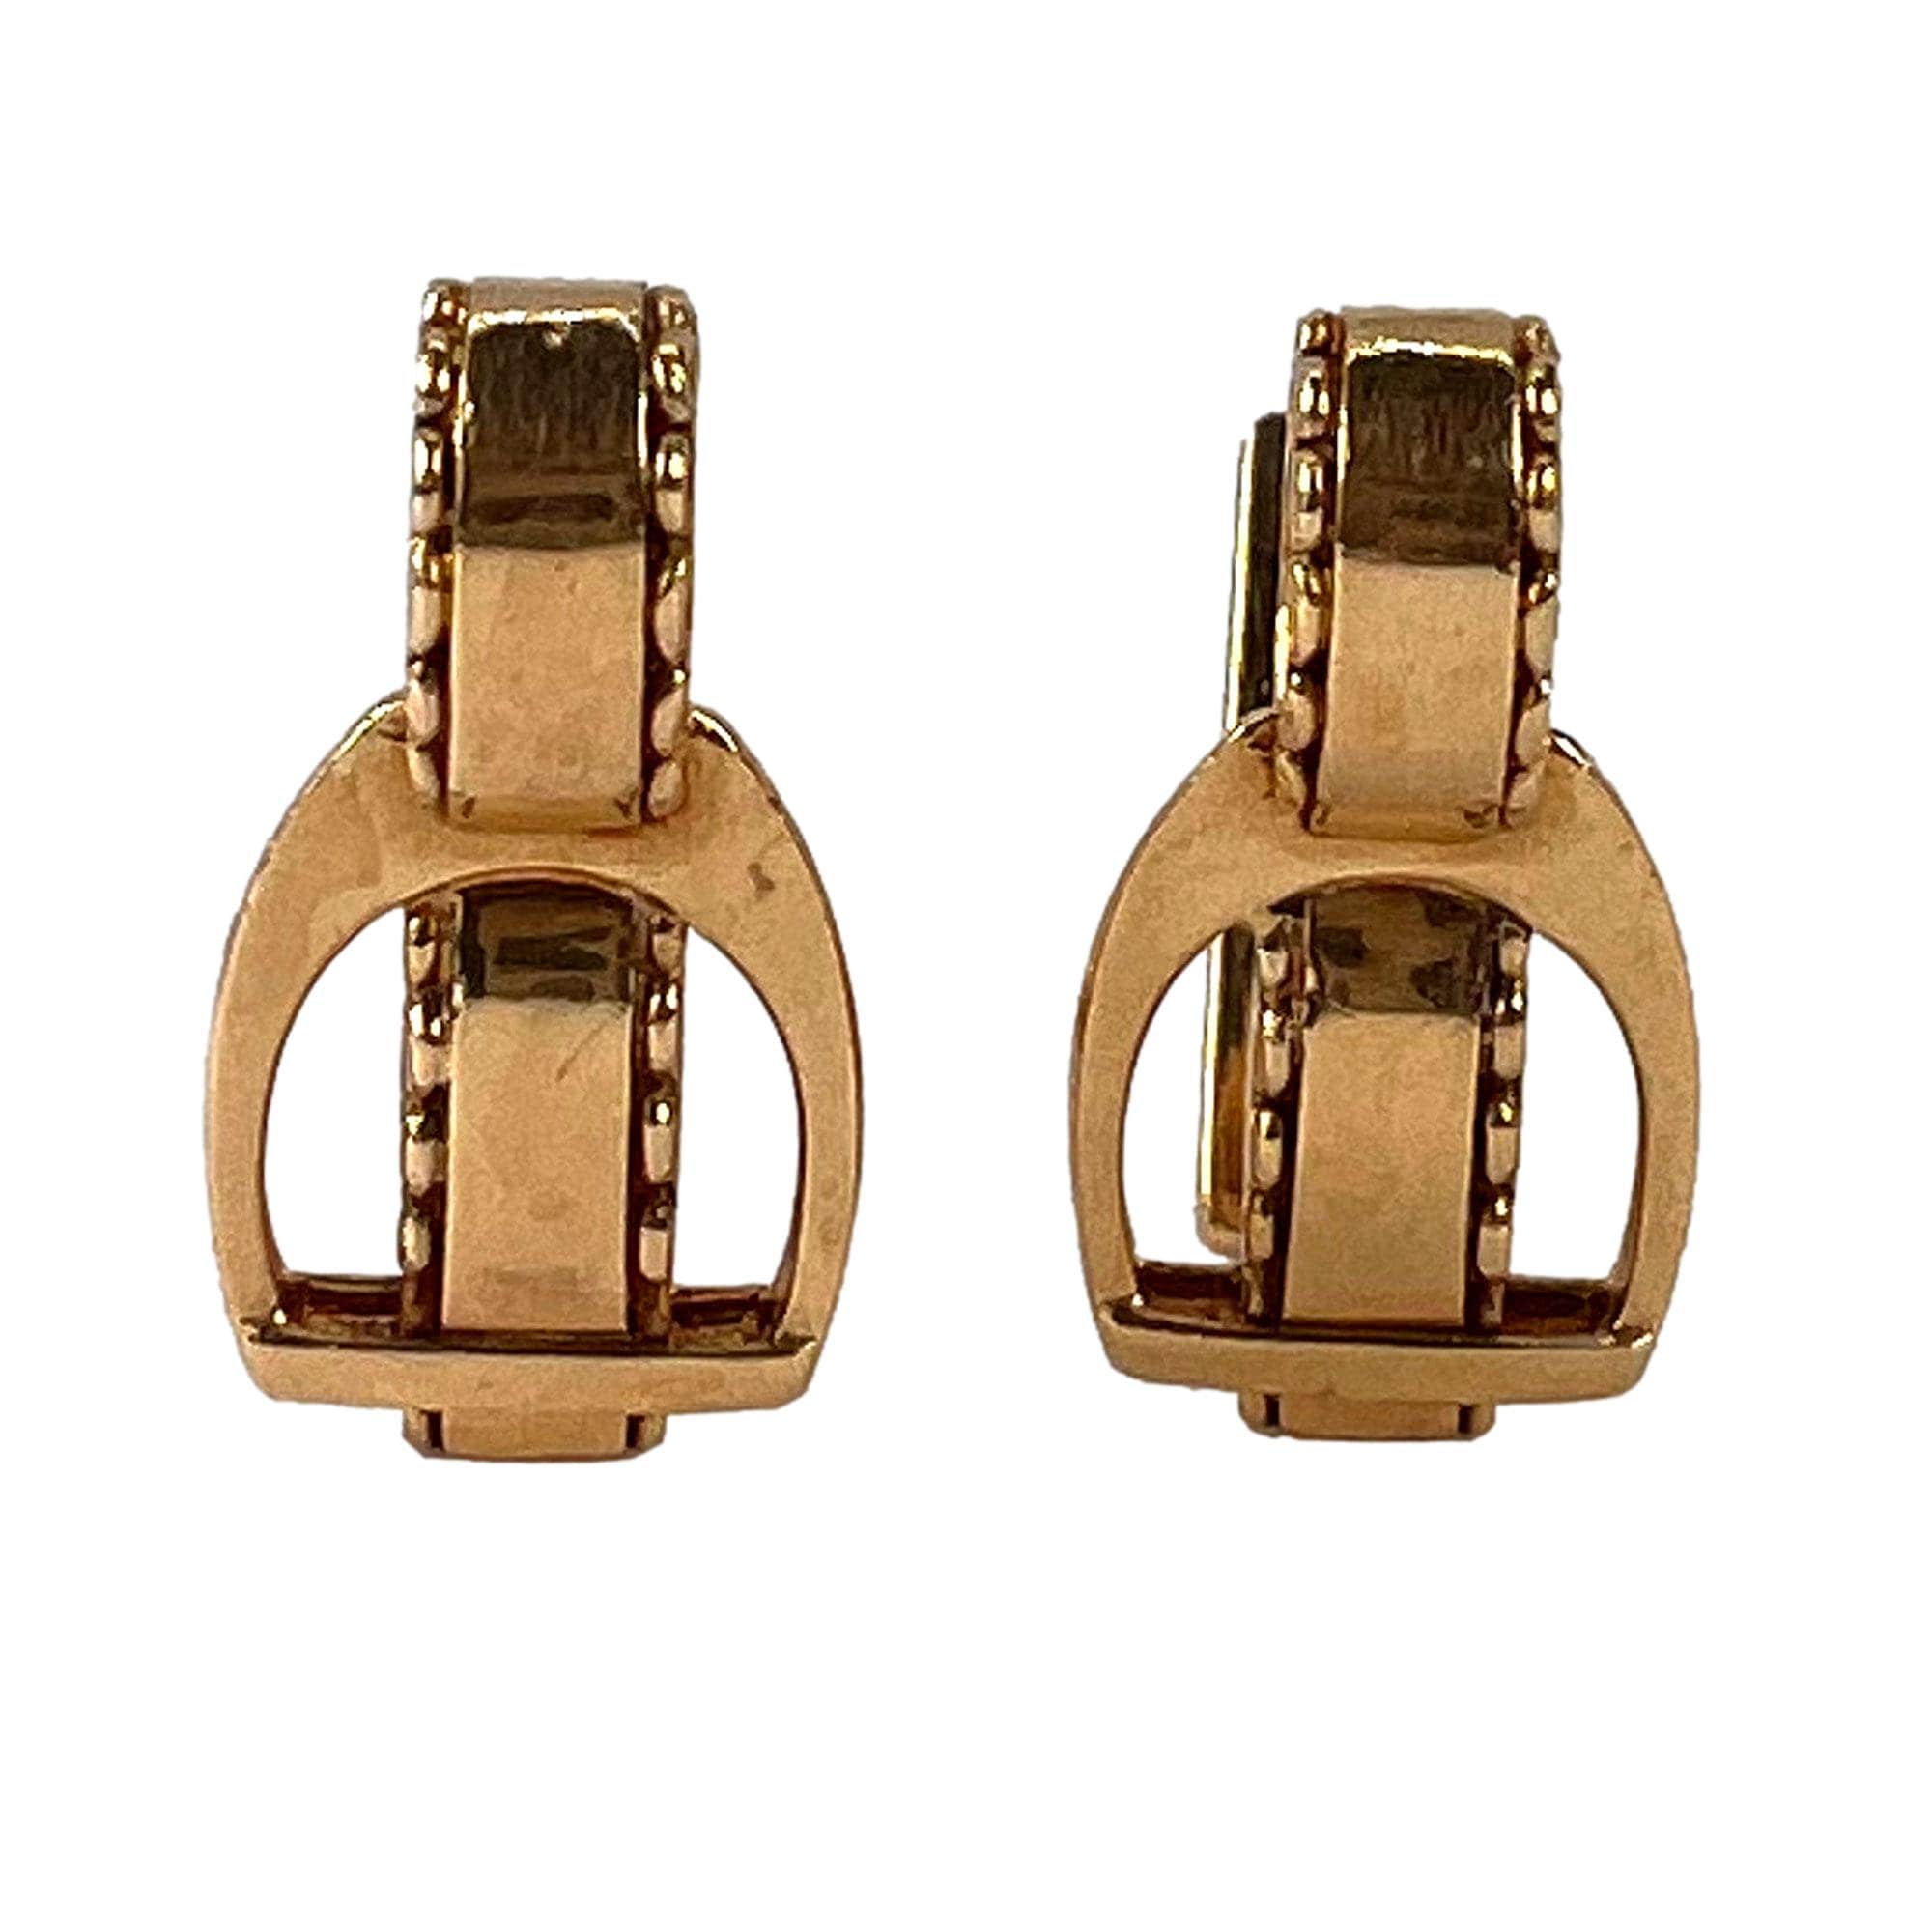 Hermès Vintage Gold Cufflinks Available For Immediate Sale At